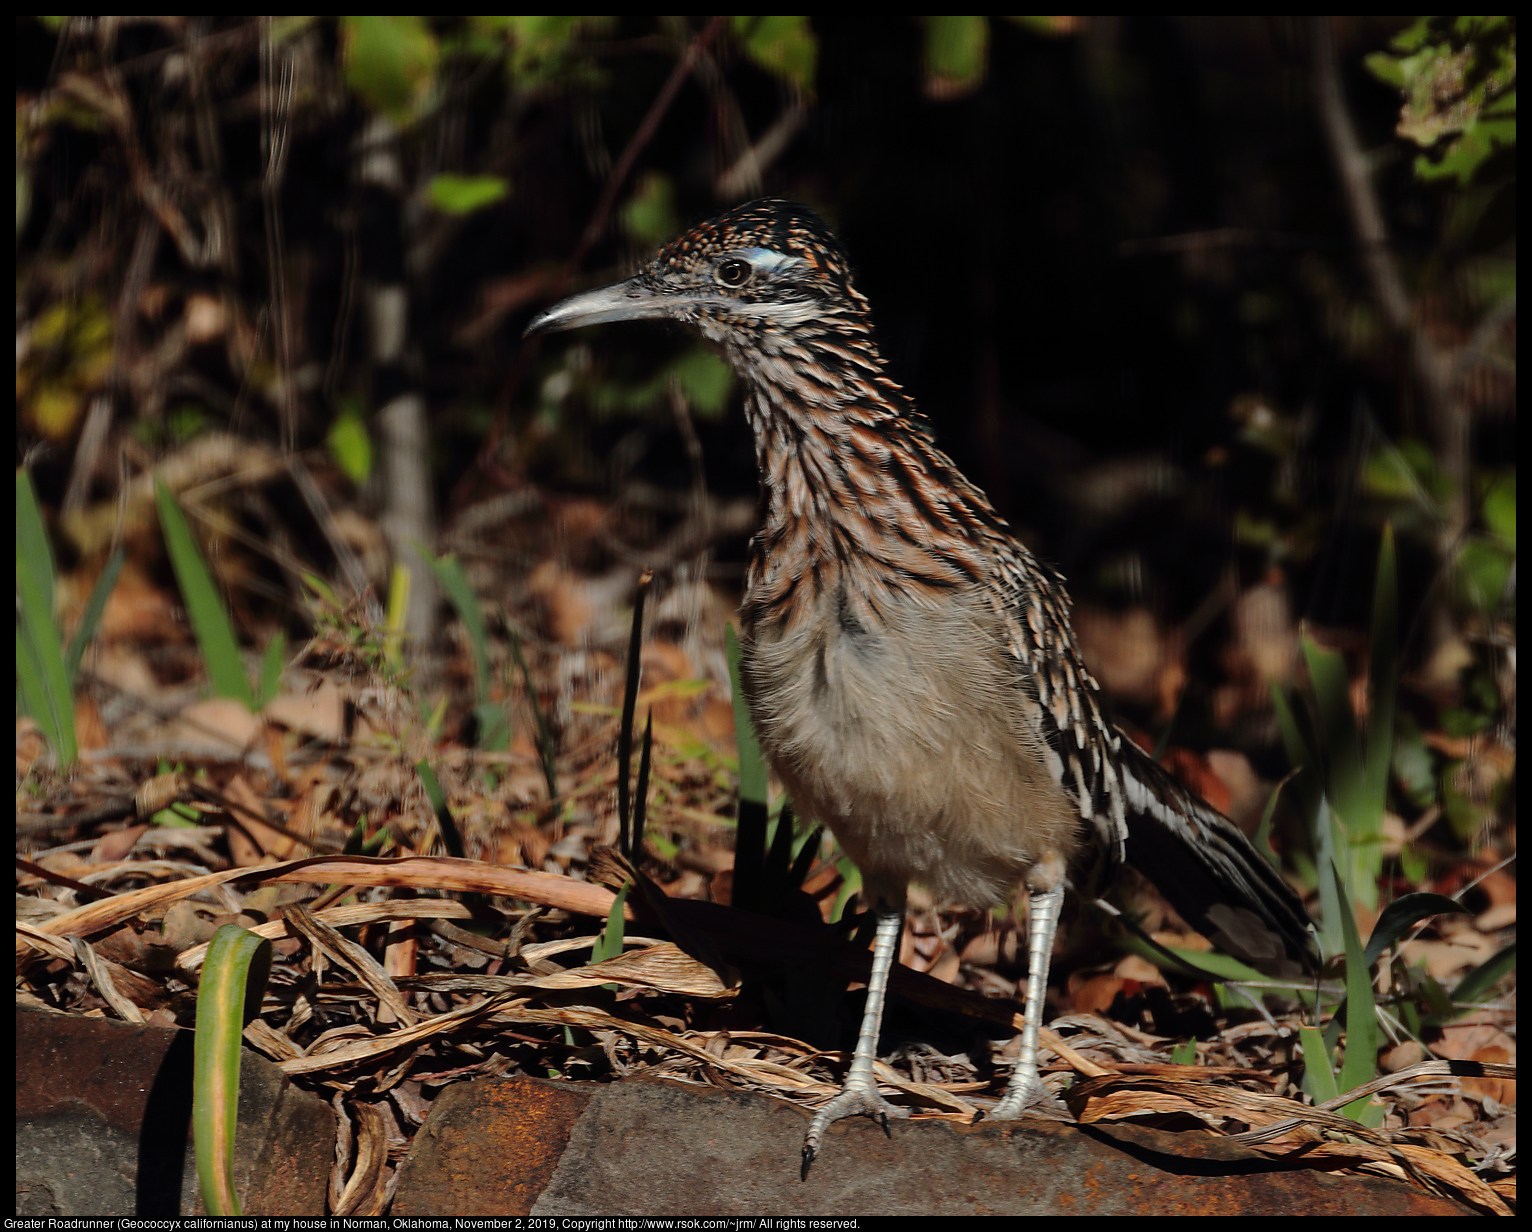 Greater Roadrunner (Geococcyx californianus) at my house in Norman, Oklahoma, November 2, 2019